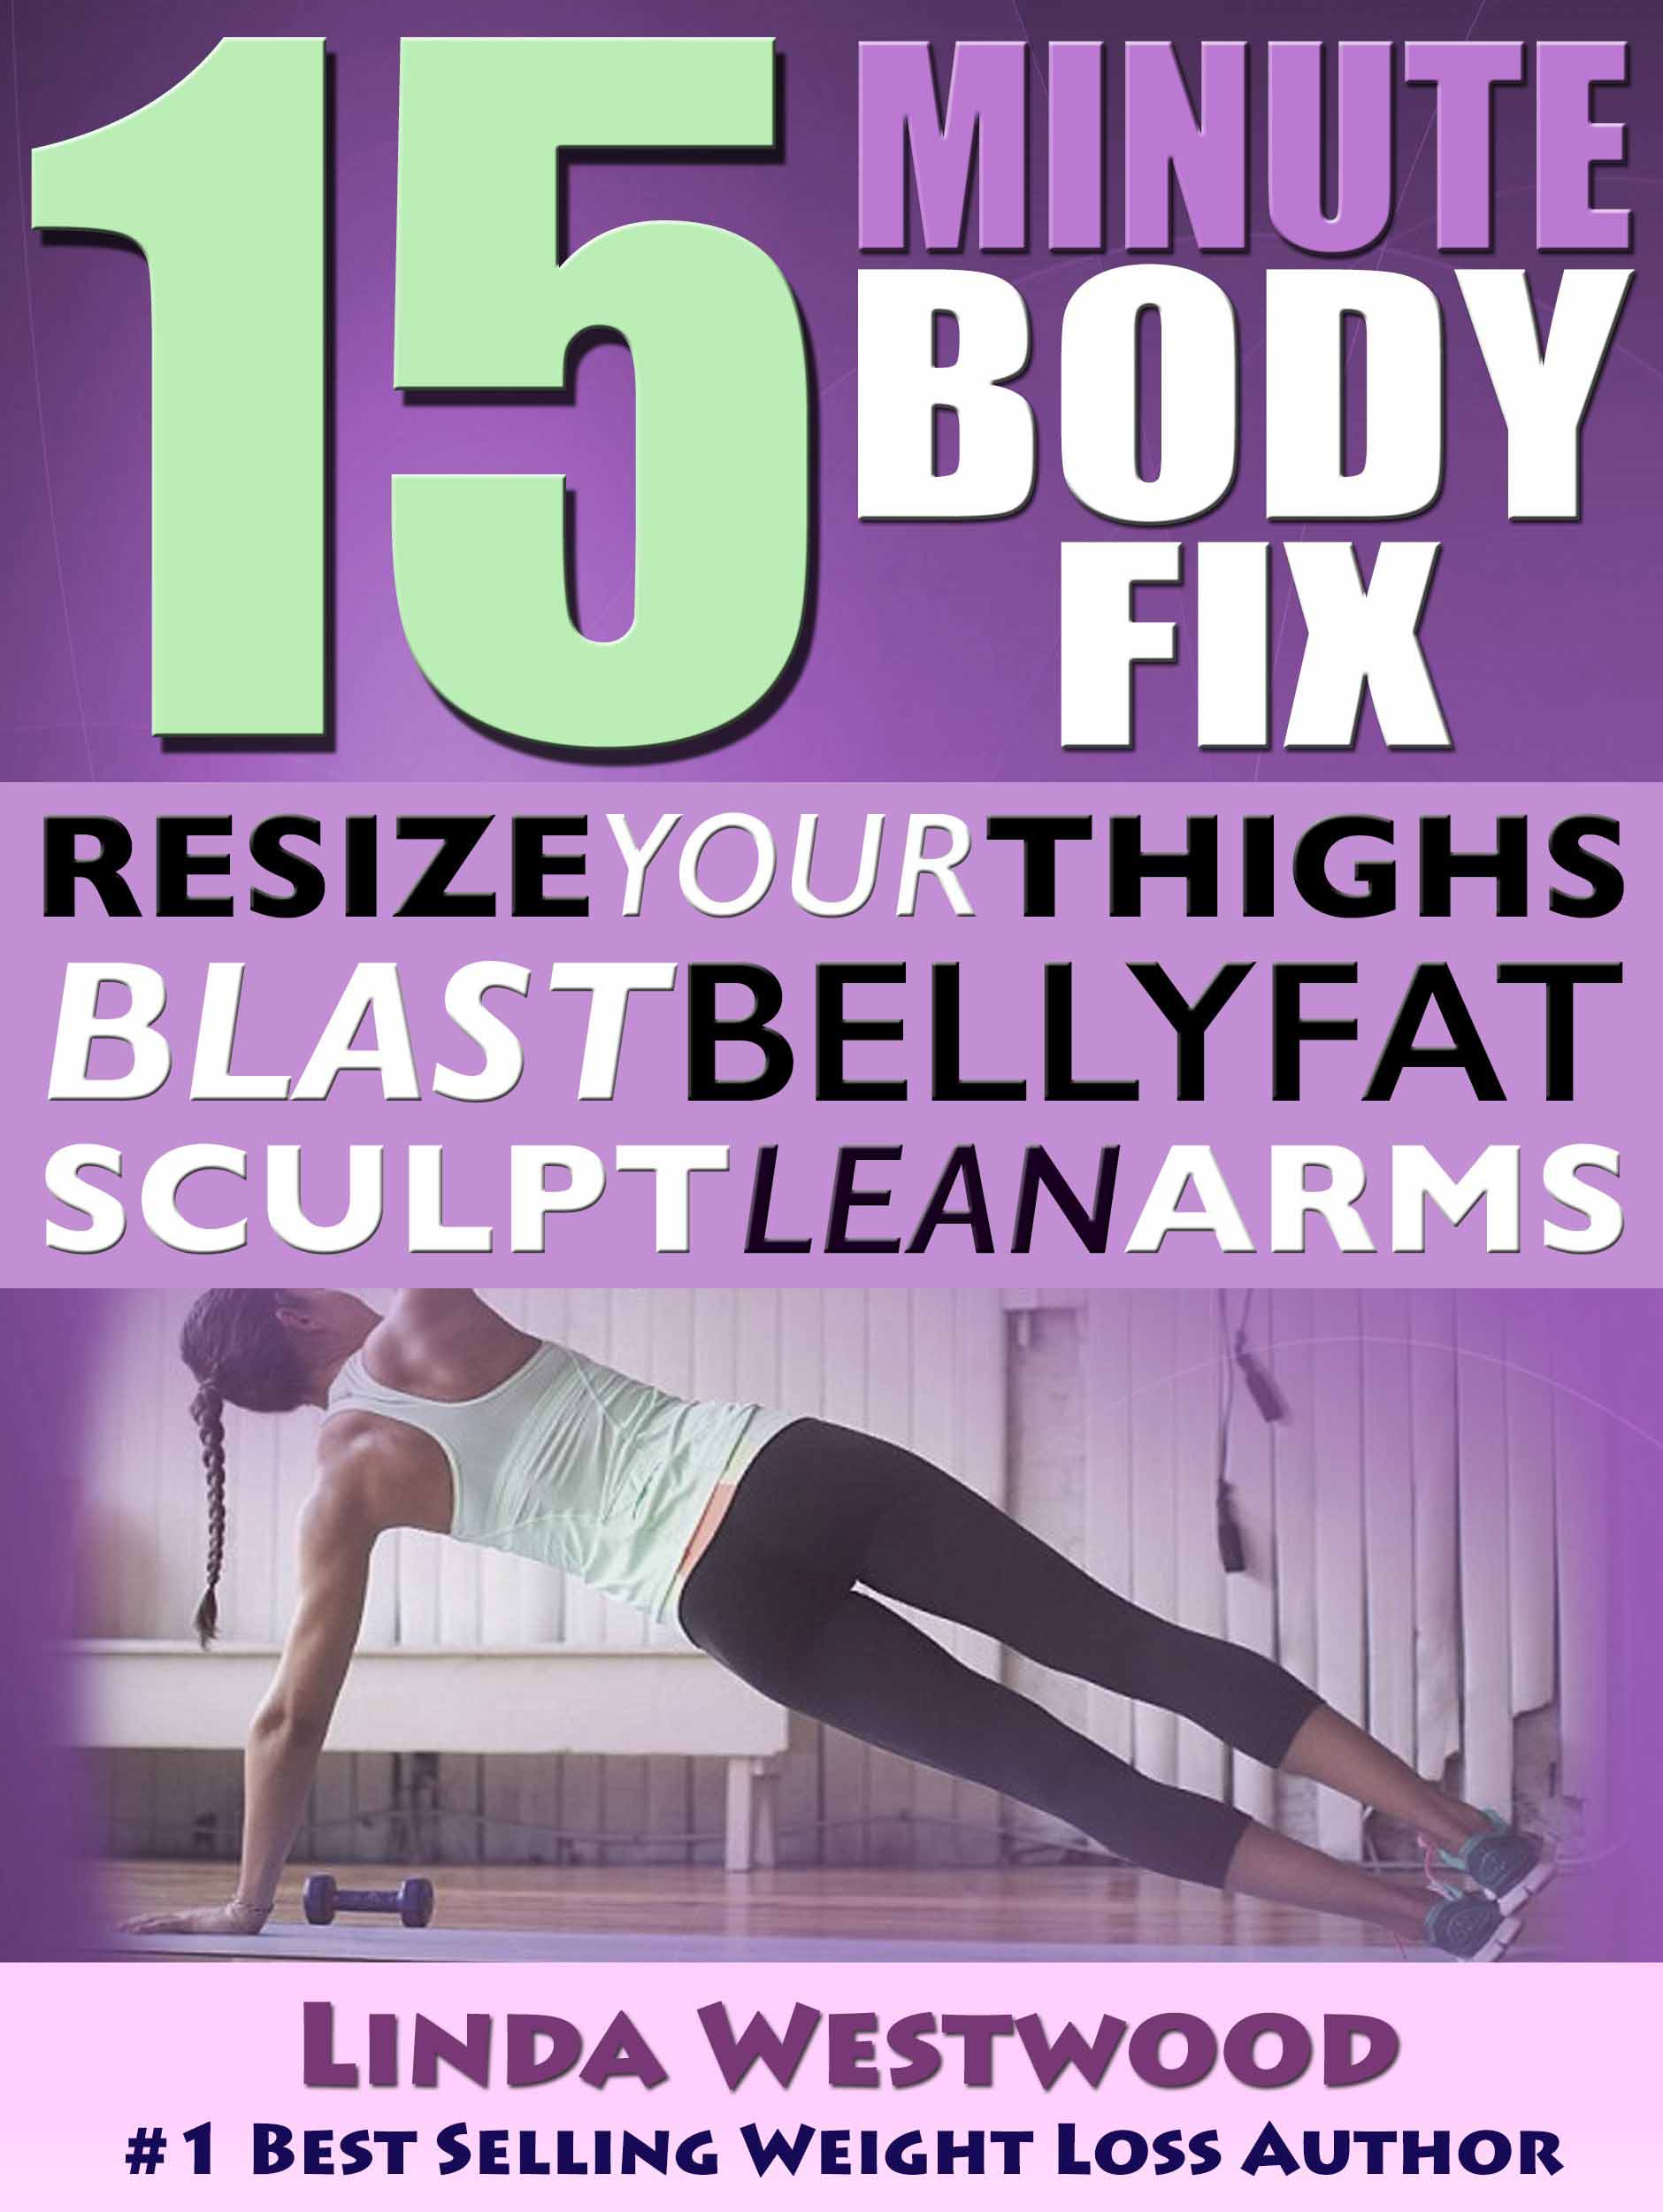 FREE: 15-Minute Body Fix: Resize Your Thighs, Blast Belly Fat & Sculpt Lean Arms! (Exercise) by Linda Westwood